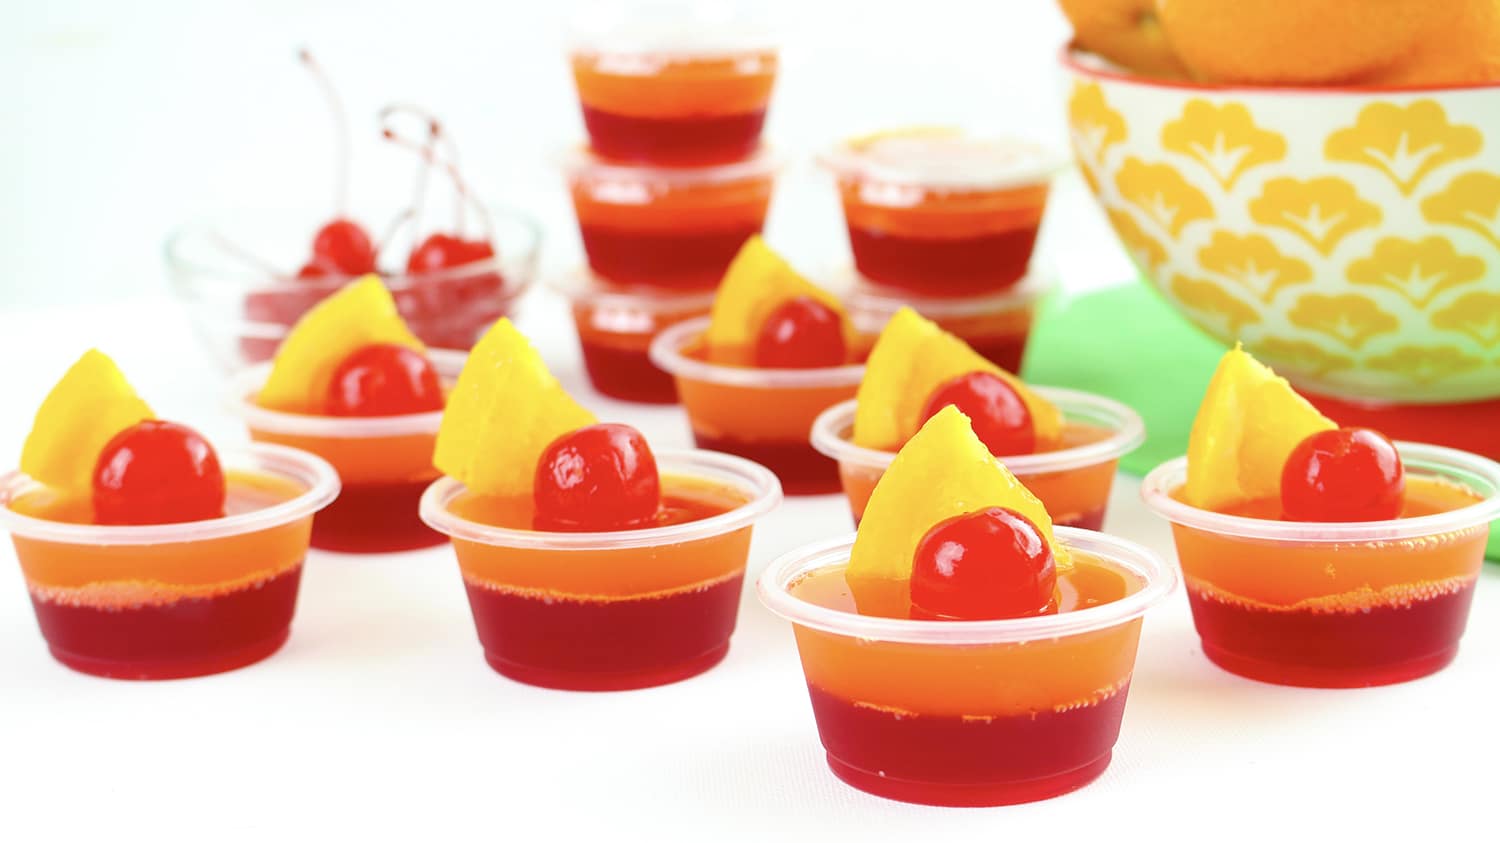 jello shot cups garnished with pineapples and cherries